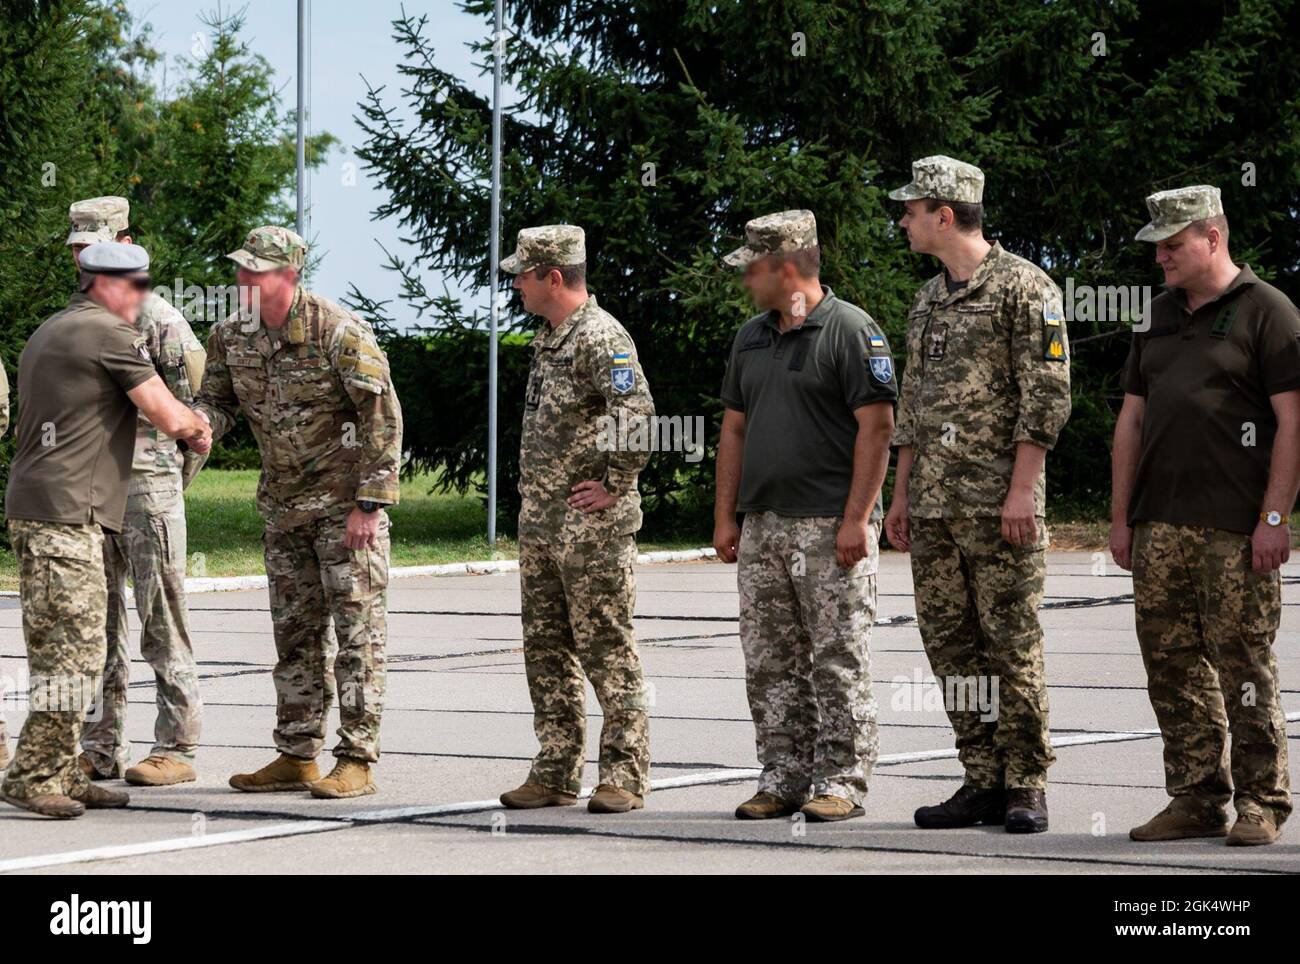 Ukrainian Air Force and Ukrainian Special Operations Command members welcome Airmen of the 352d Special Operations Wing during an opening ceremony beginning a month of interoperability training events in Vinnytsia, Ukraine, August 2, 2021. The 352d SOW deployed to Ukraine to demonstrate commitment in the Black Sea region by strengthening relationships and combined capability. Stock Photo